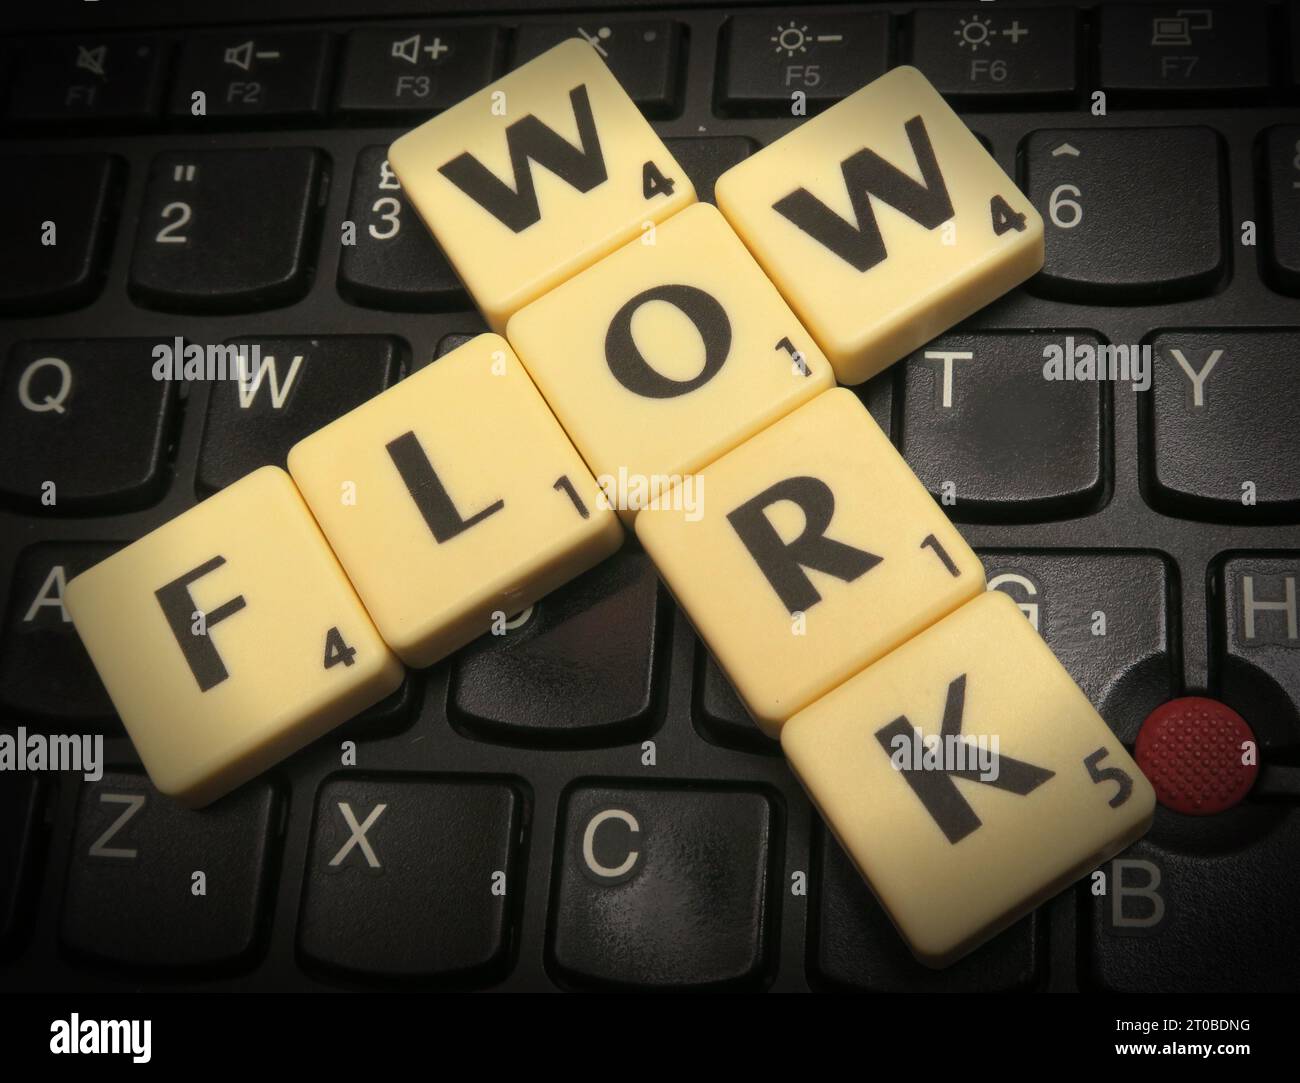 Workflow in Scrabble letters, automation of computer systems and processes Stock Photo